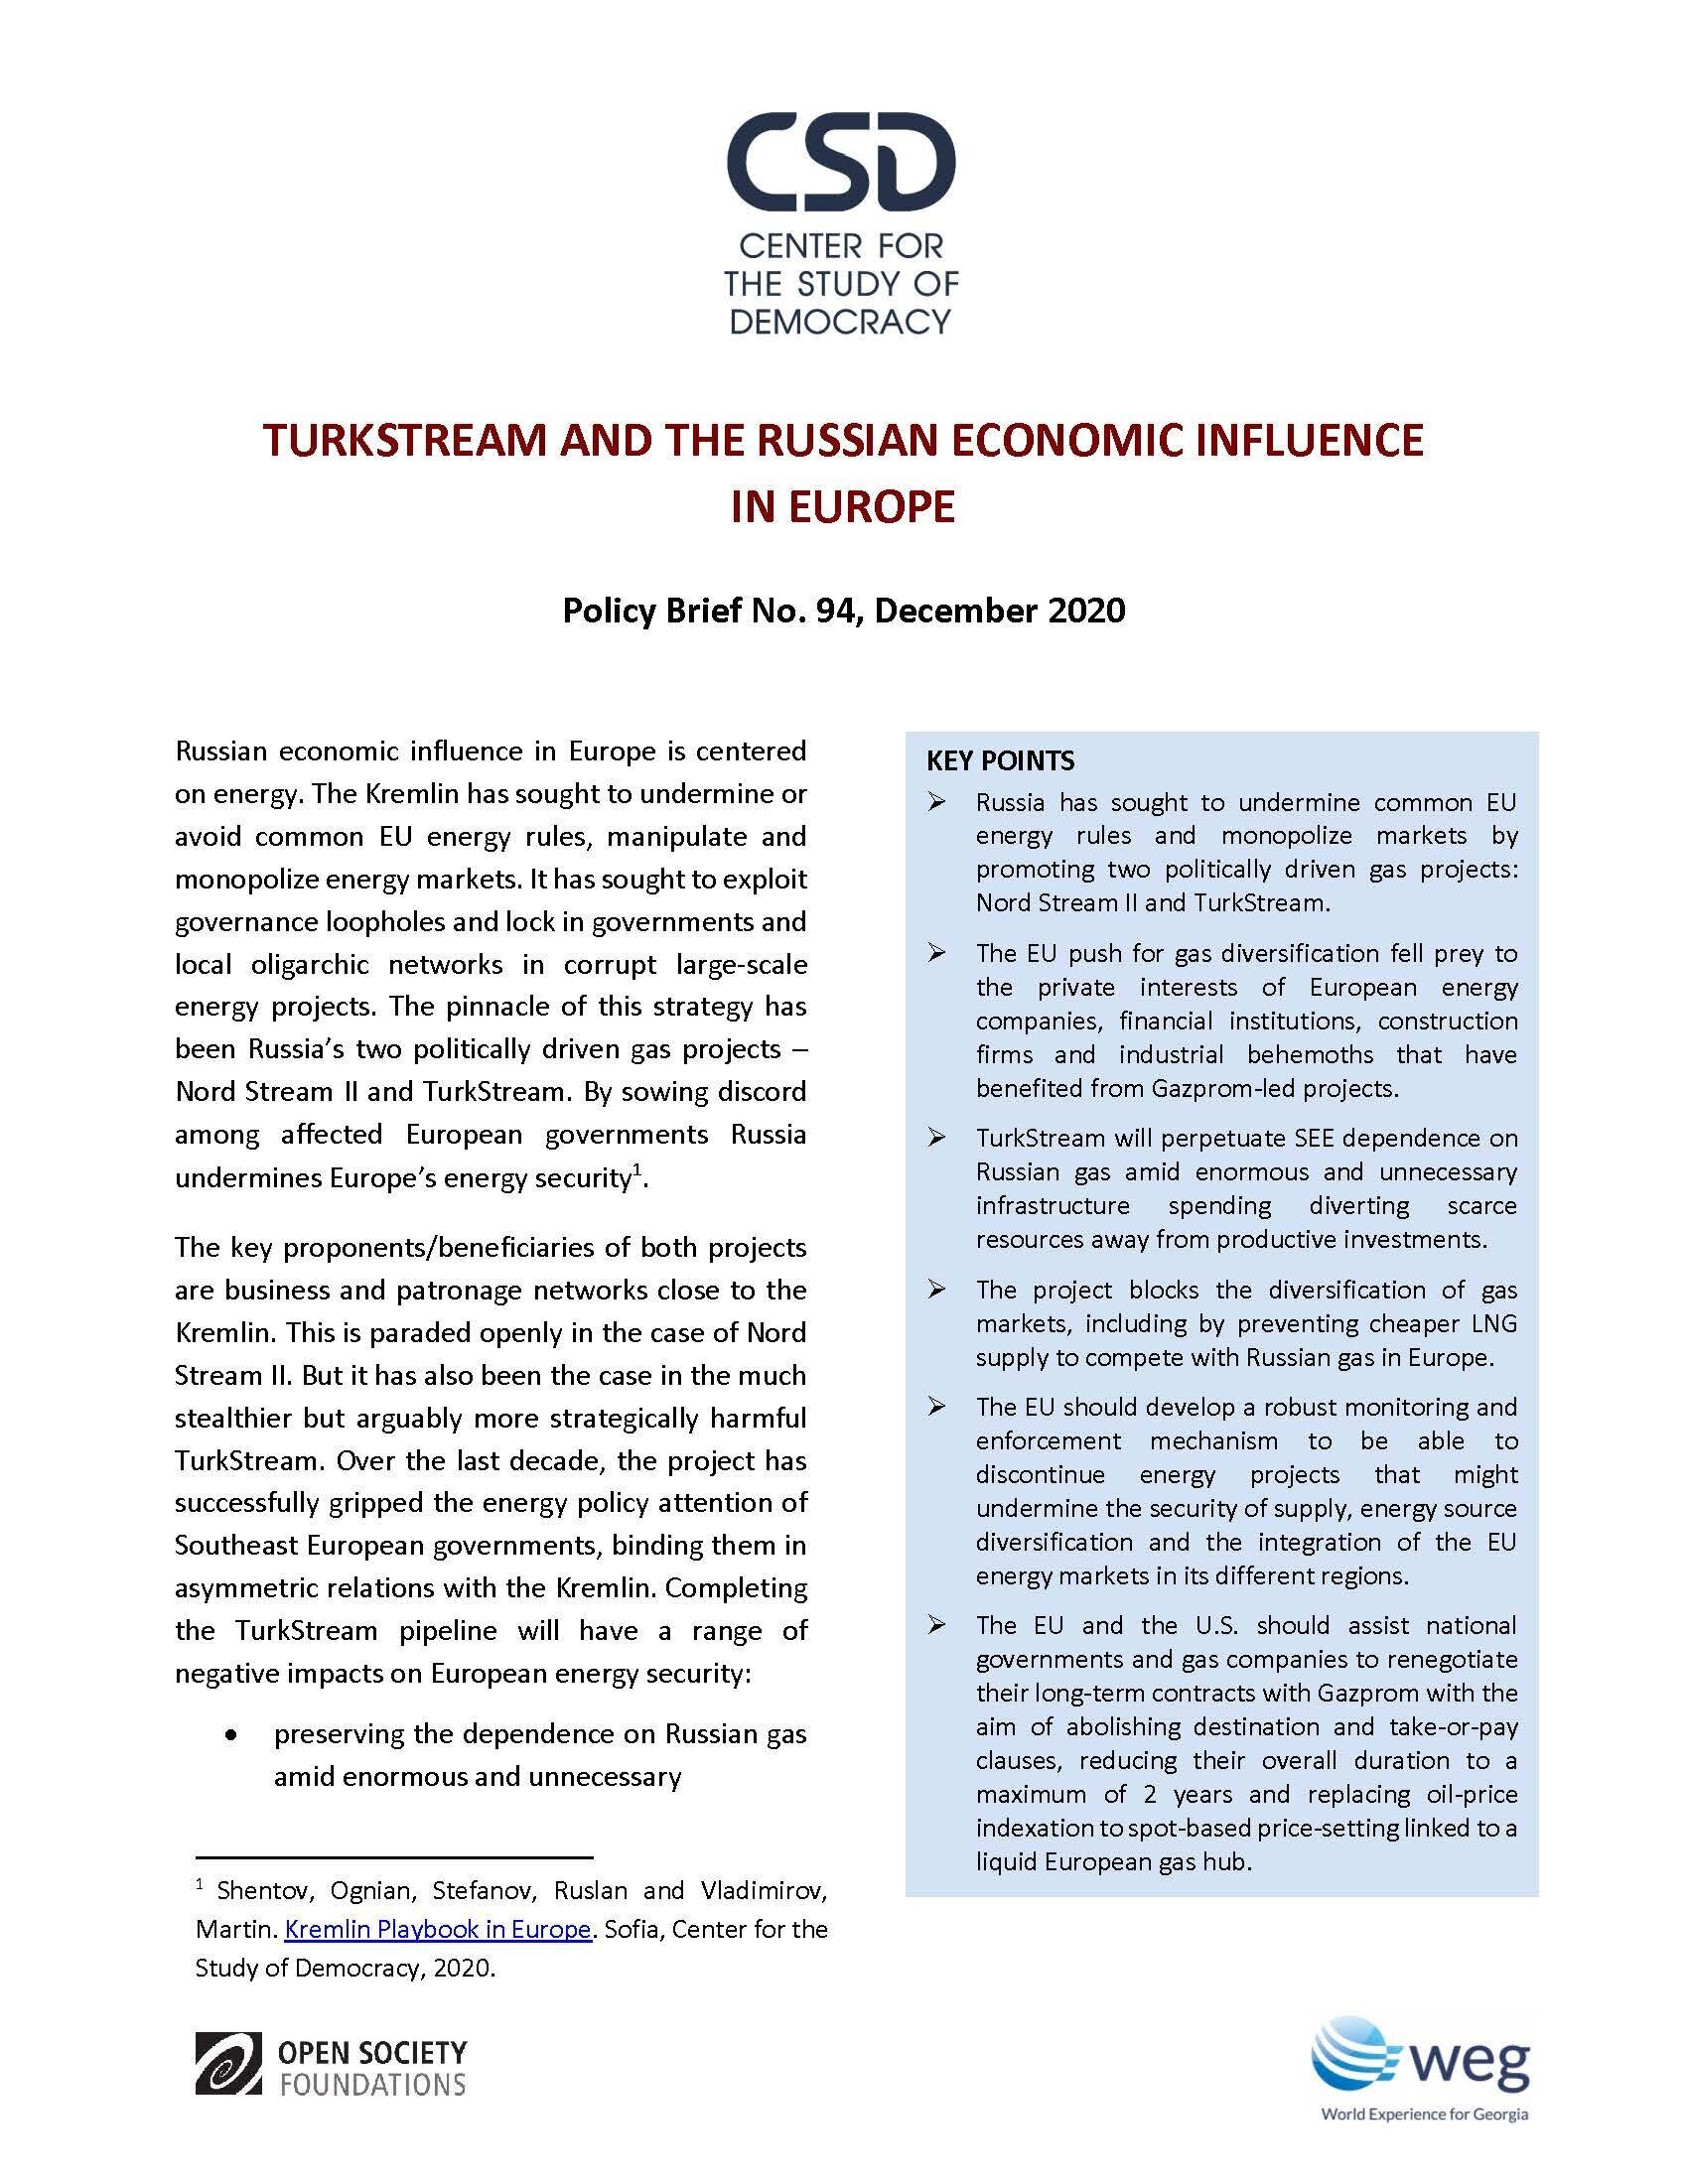 TurkStream and the Russian Economic Influence in Europe